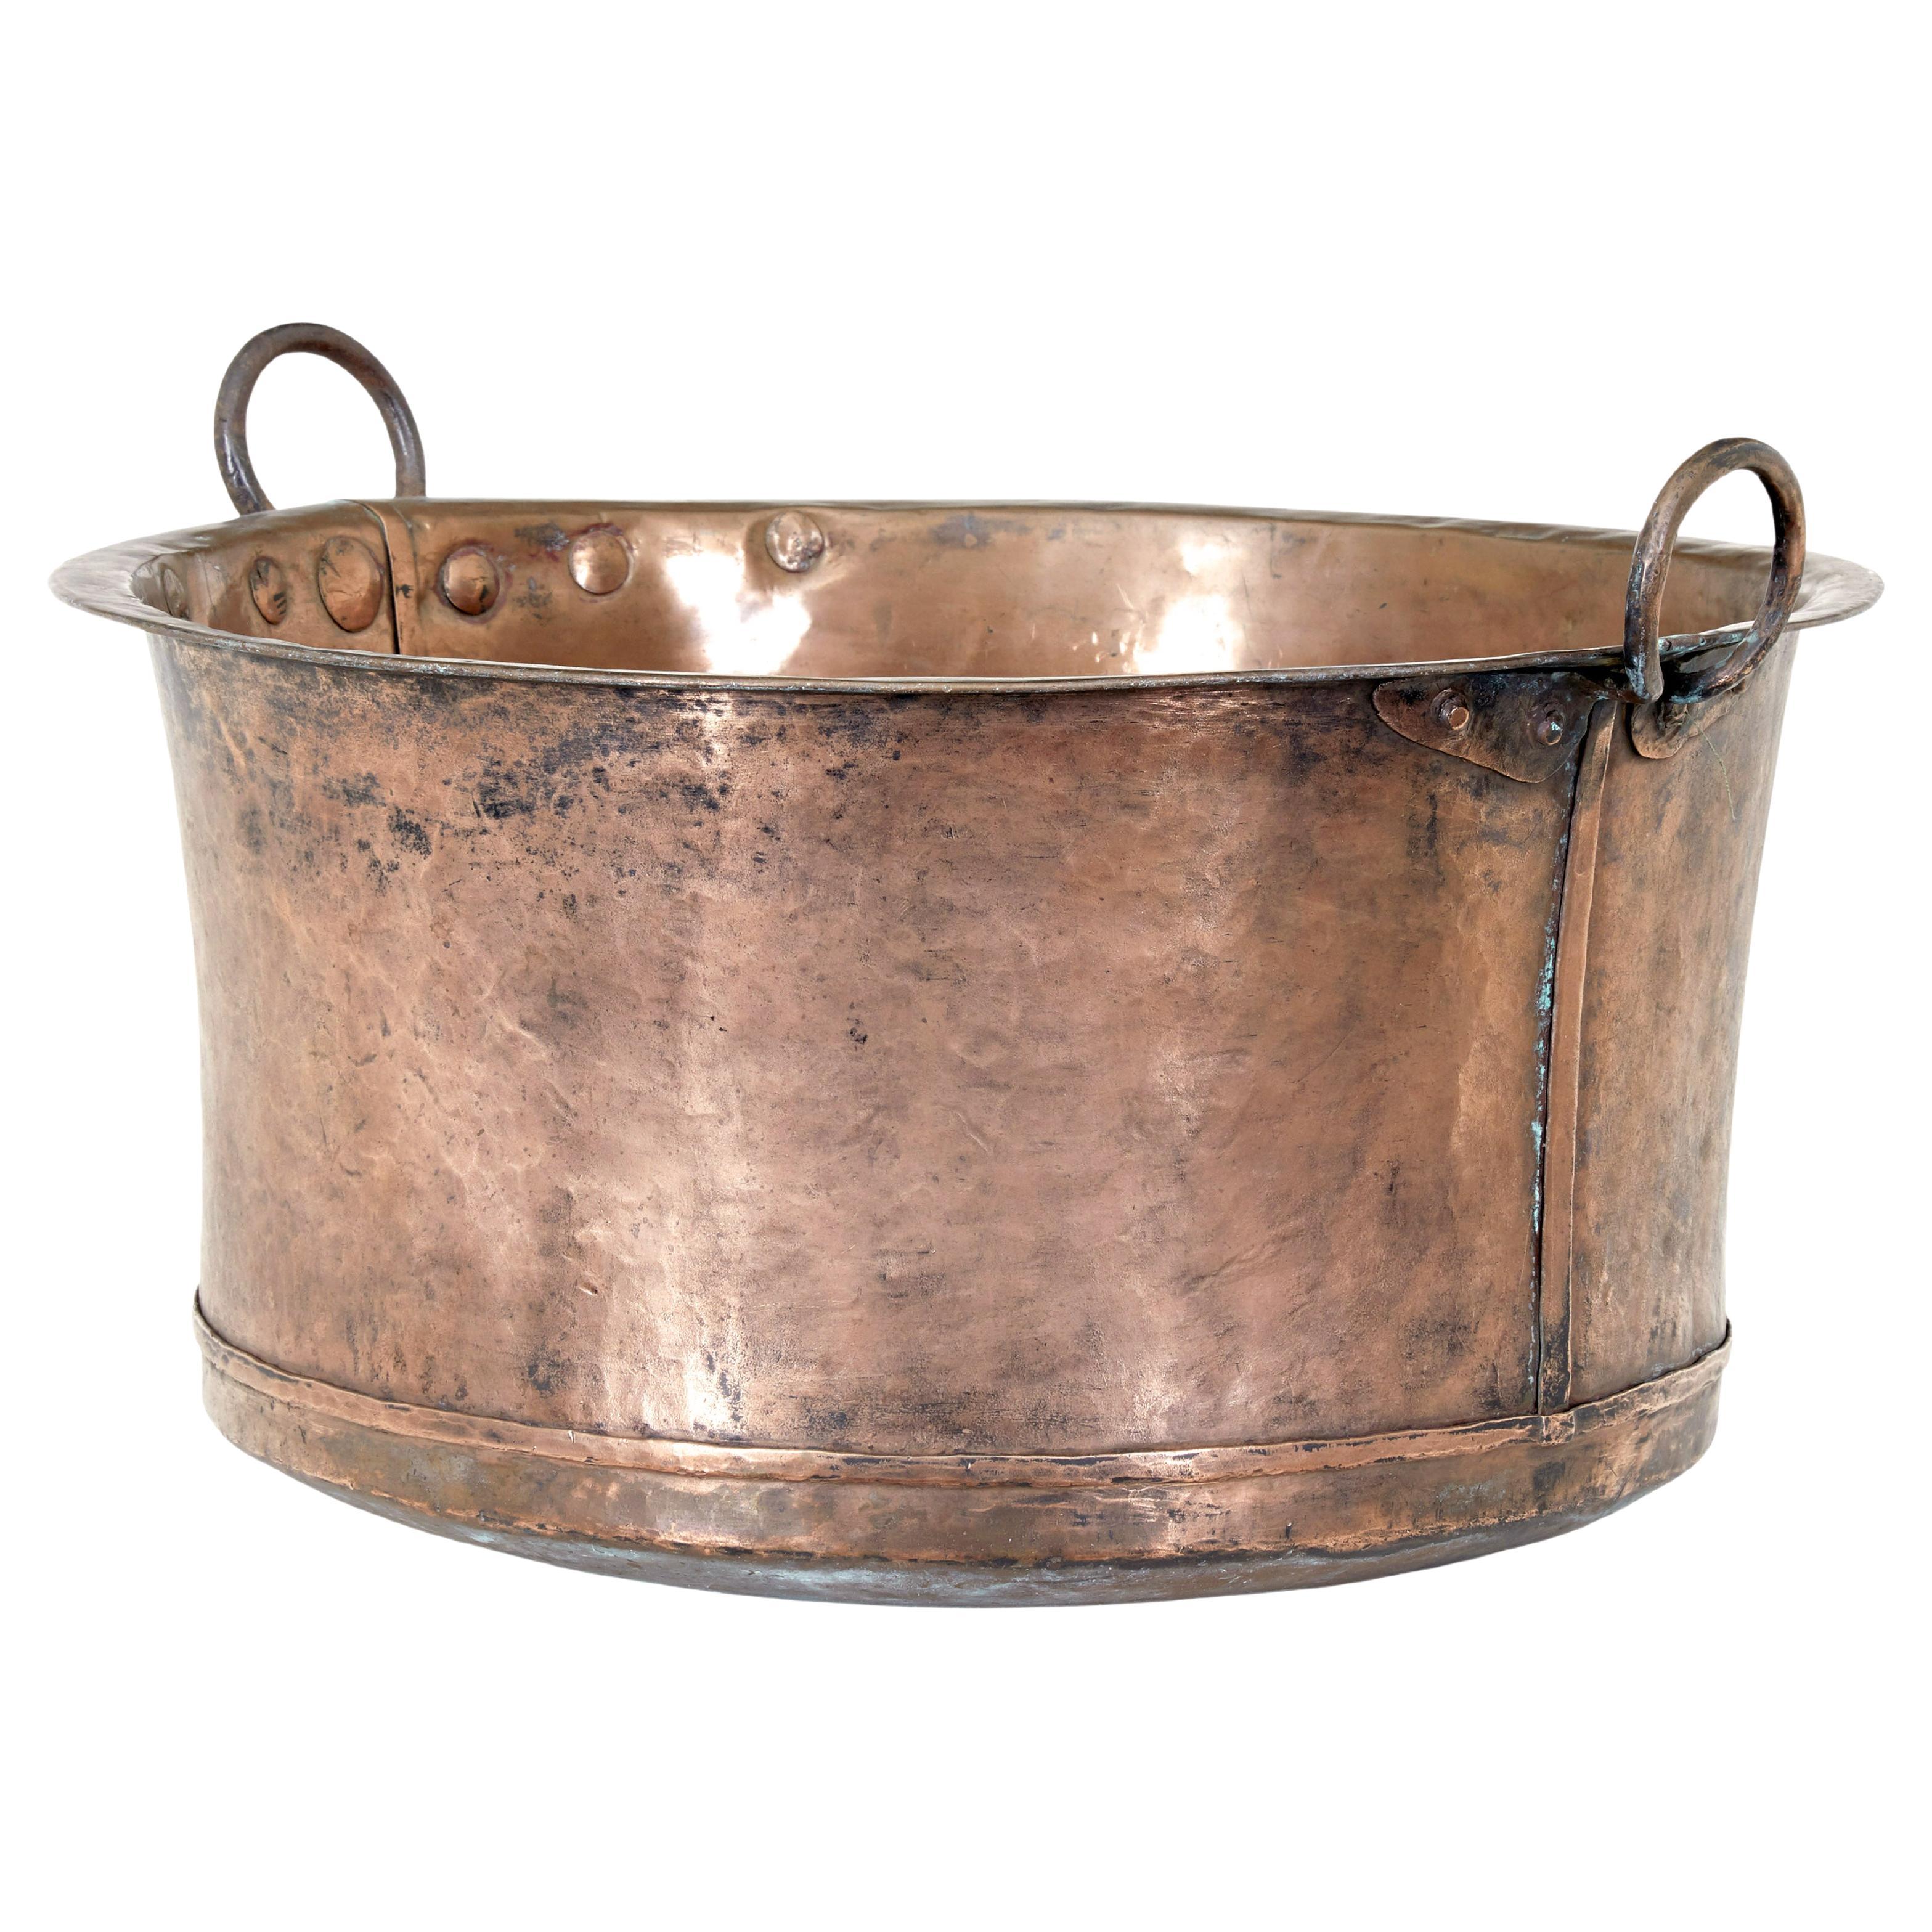 Large 19th century copper cooking vessel